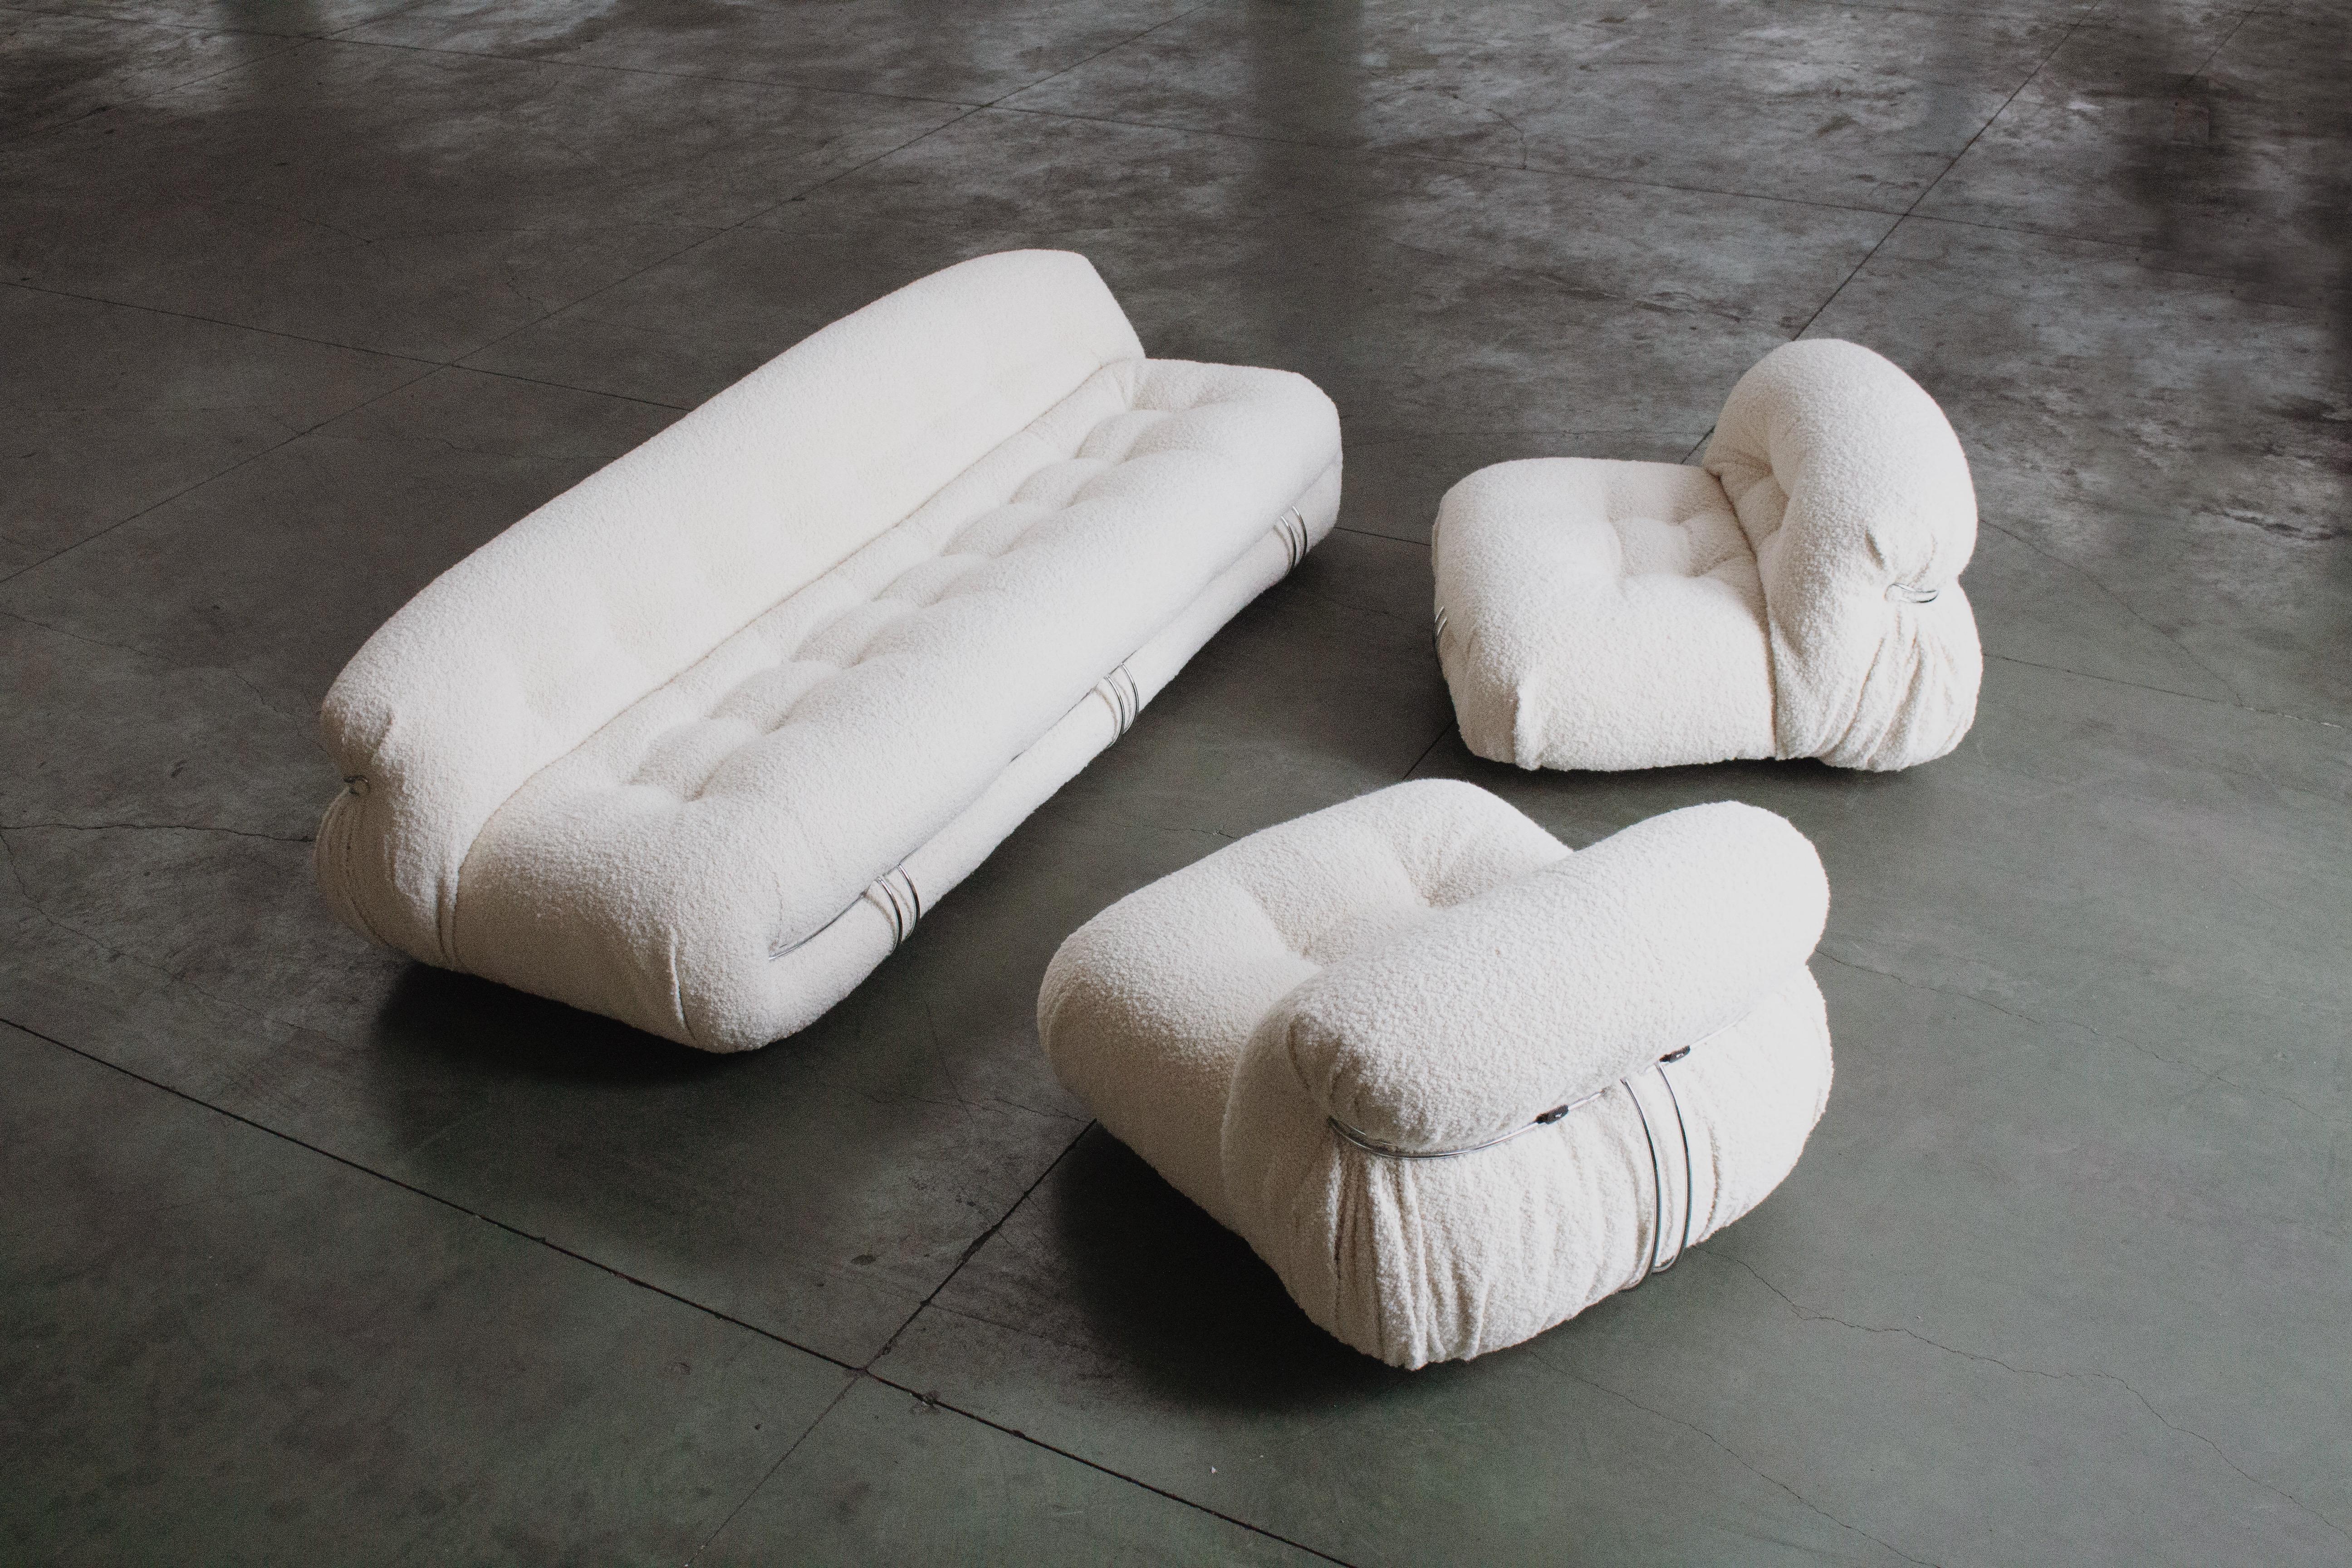 Afra & Tobia Scarpa “Soriana” living room set for Cassina, three-seater sofa and two lounge chairs, ivory bouclé wool and chromed steel, Italy, 1969, set of three. 

Although technically designed in the 1960s, the 